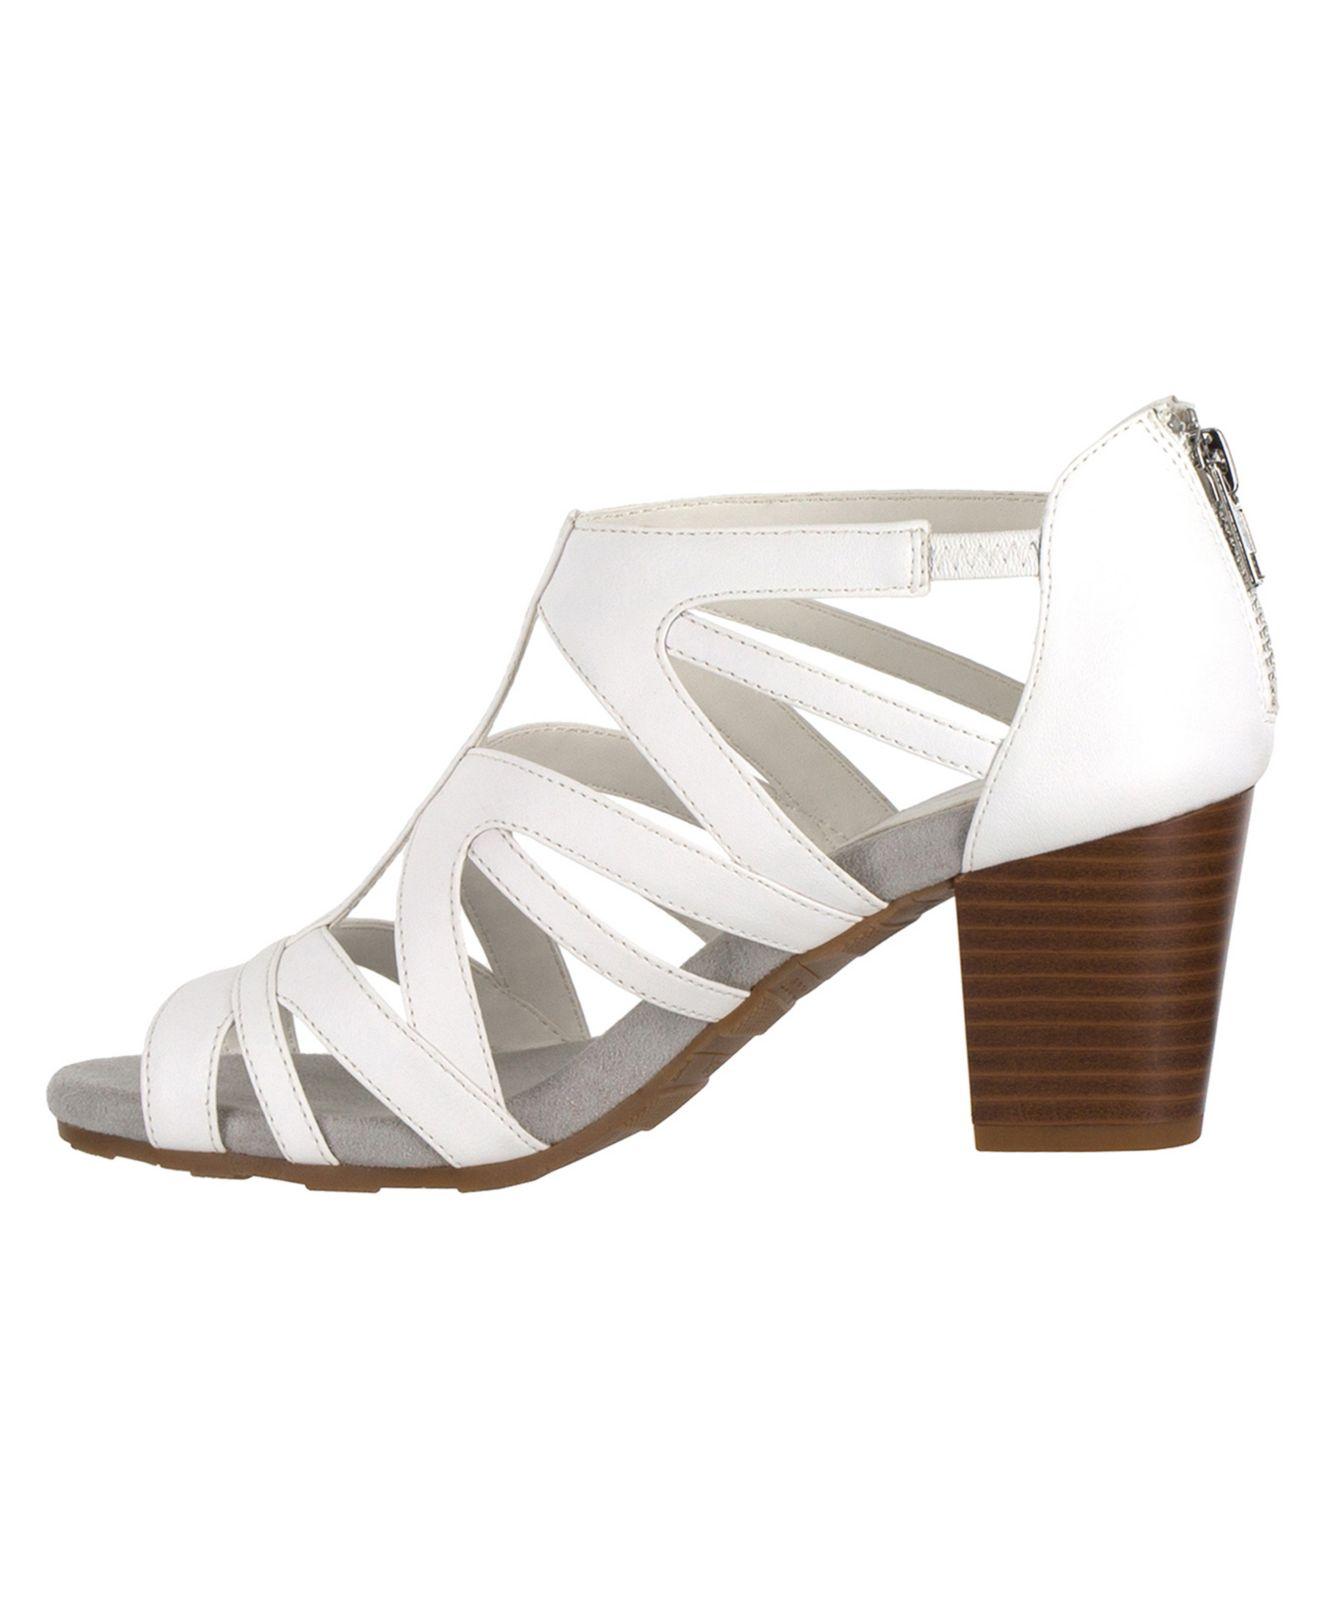 Easy Street Amaze Sandals in White - Save 35% - Lyst